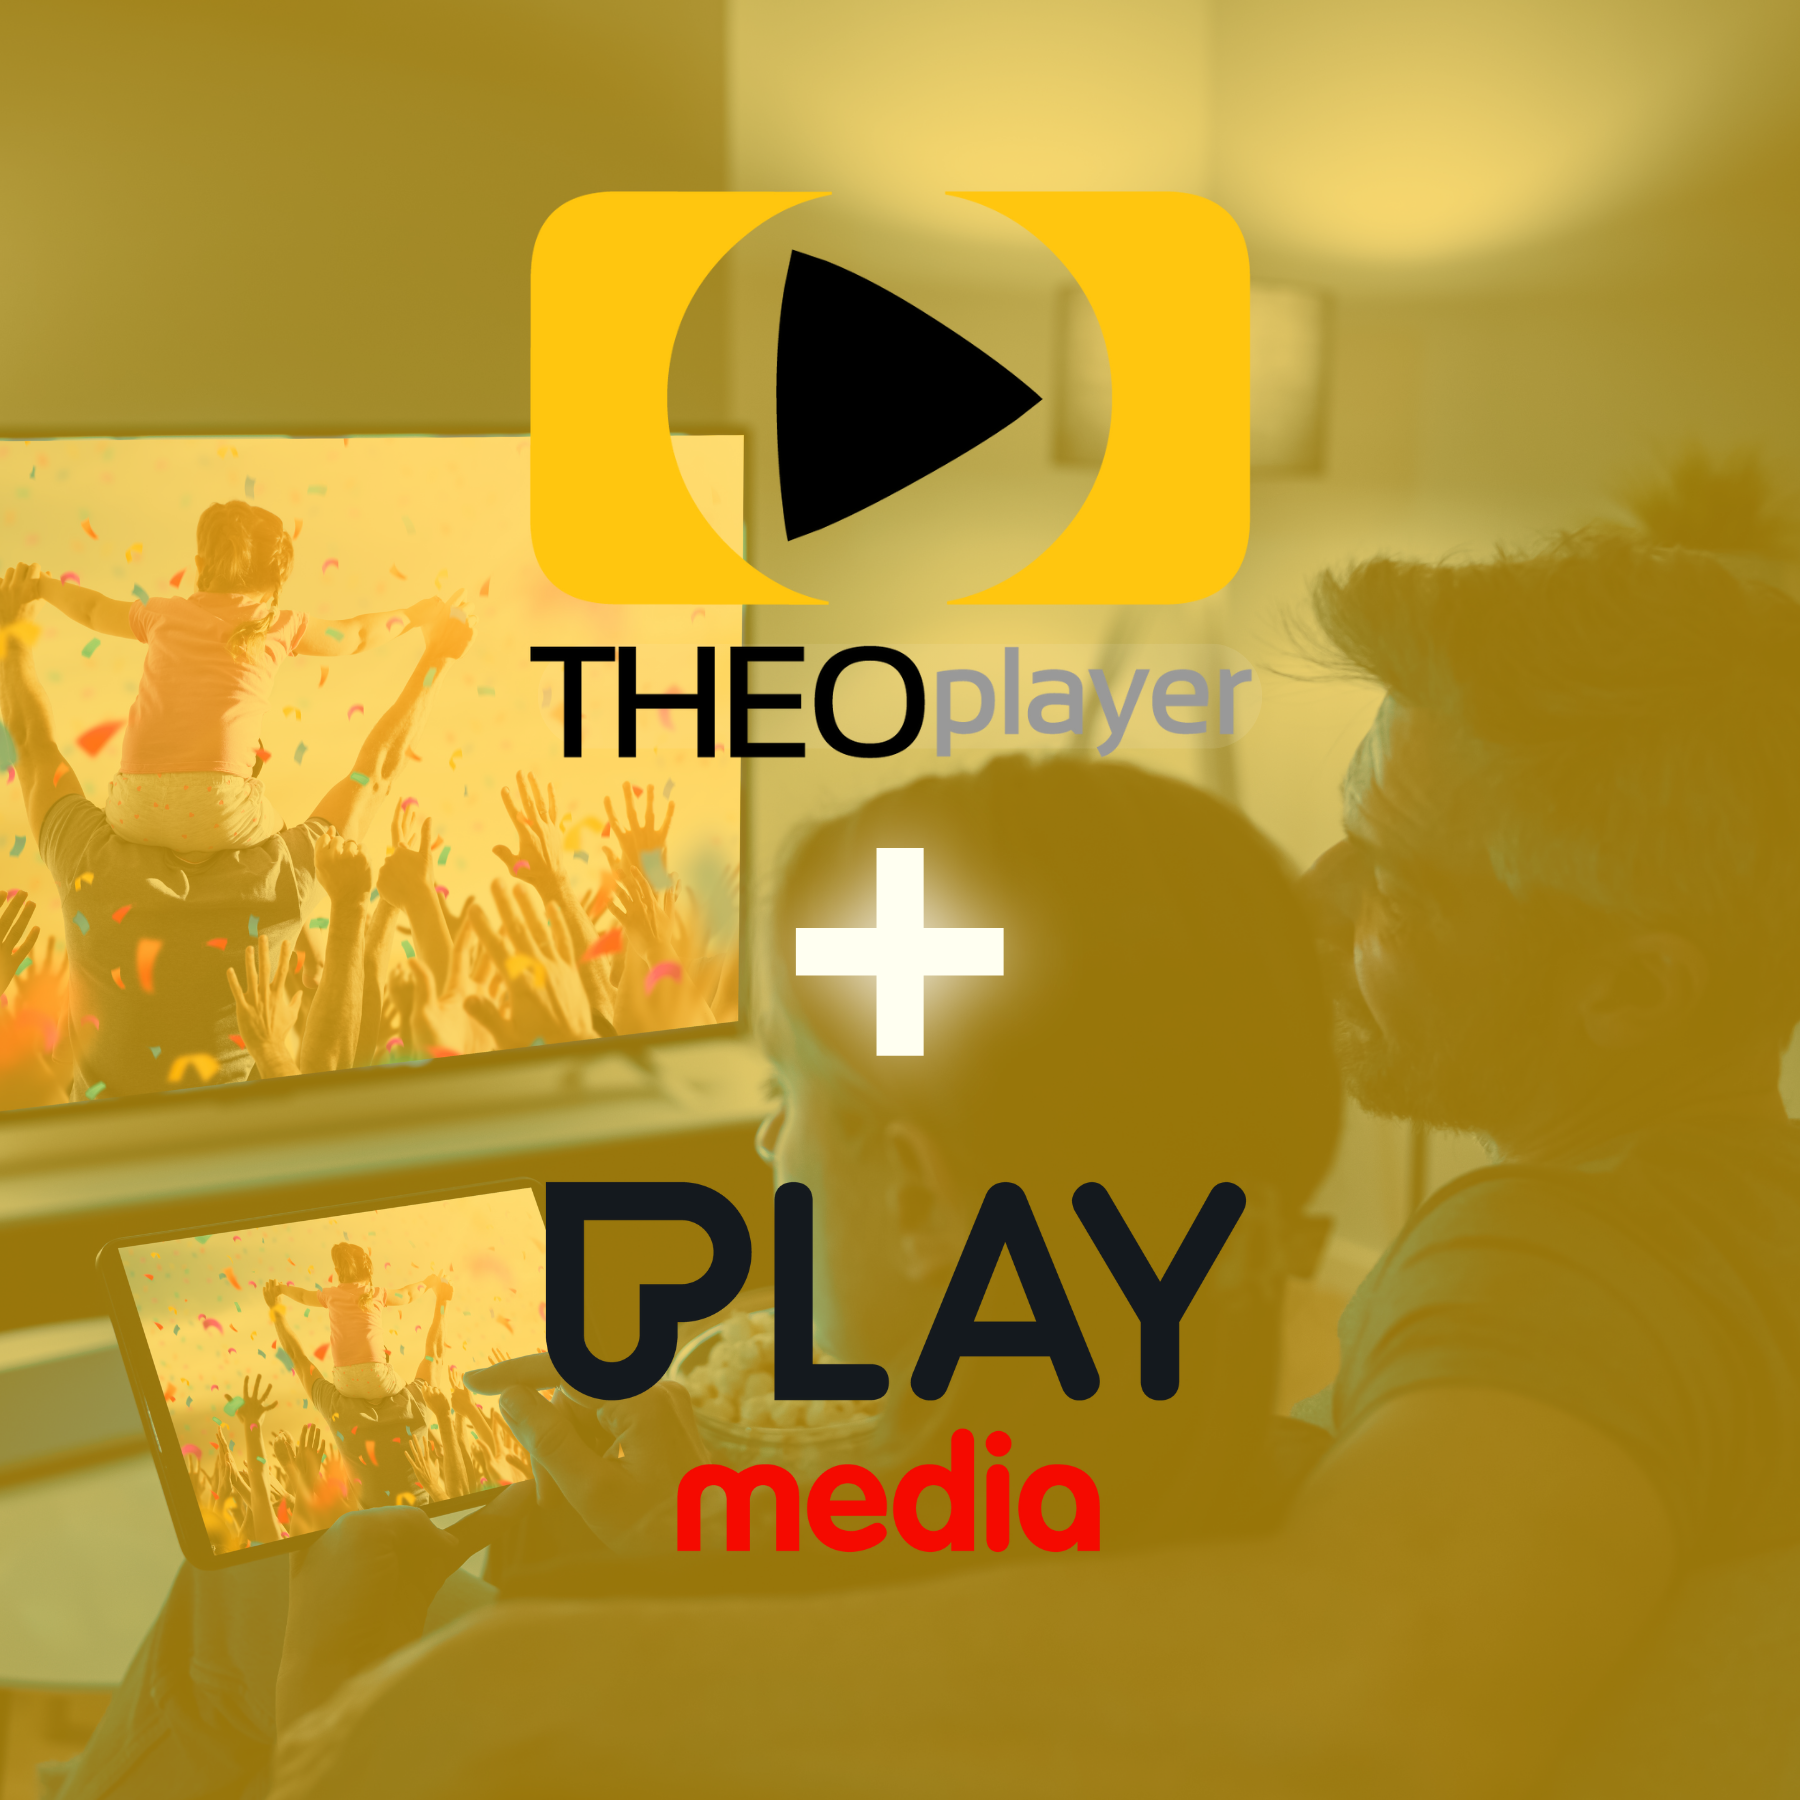 theoplayer playmedia cs story background